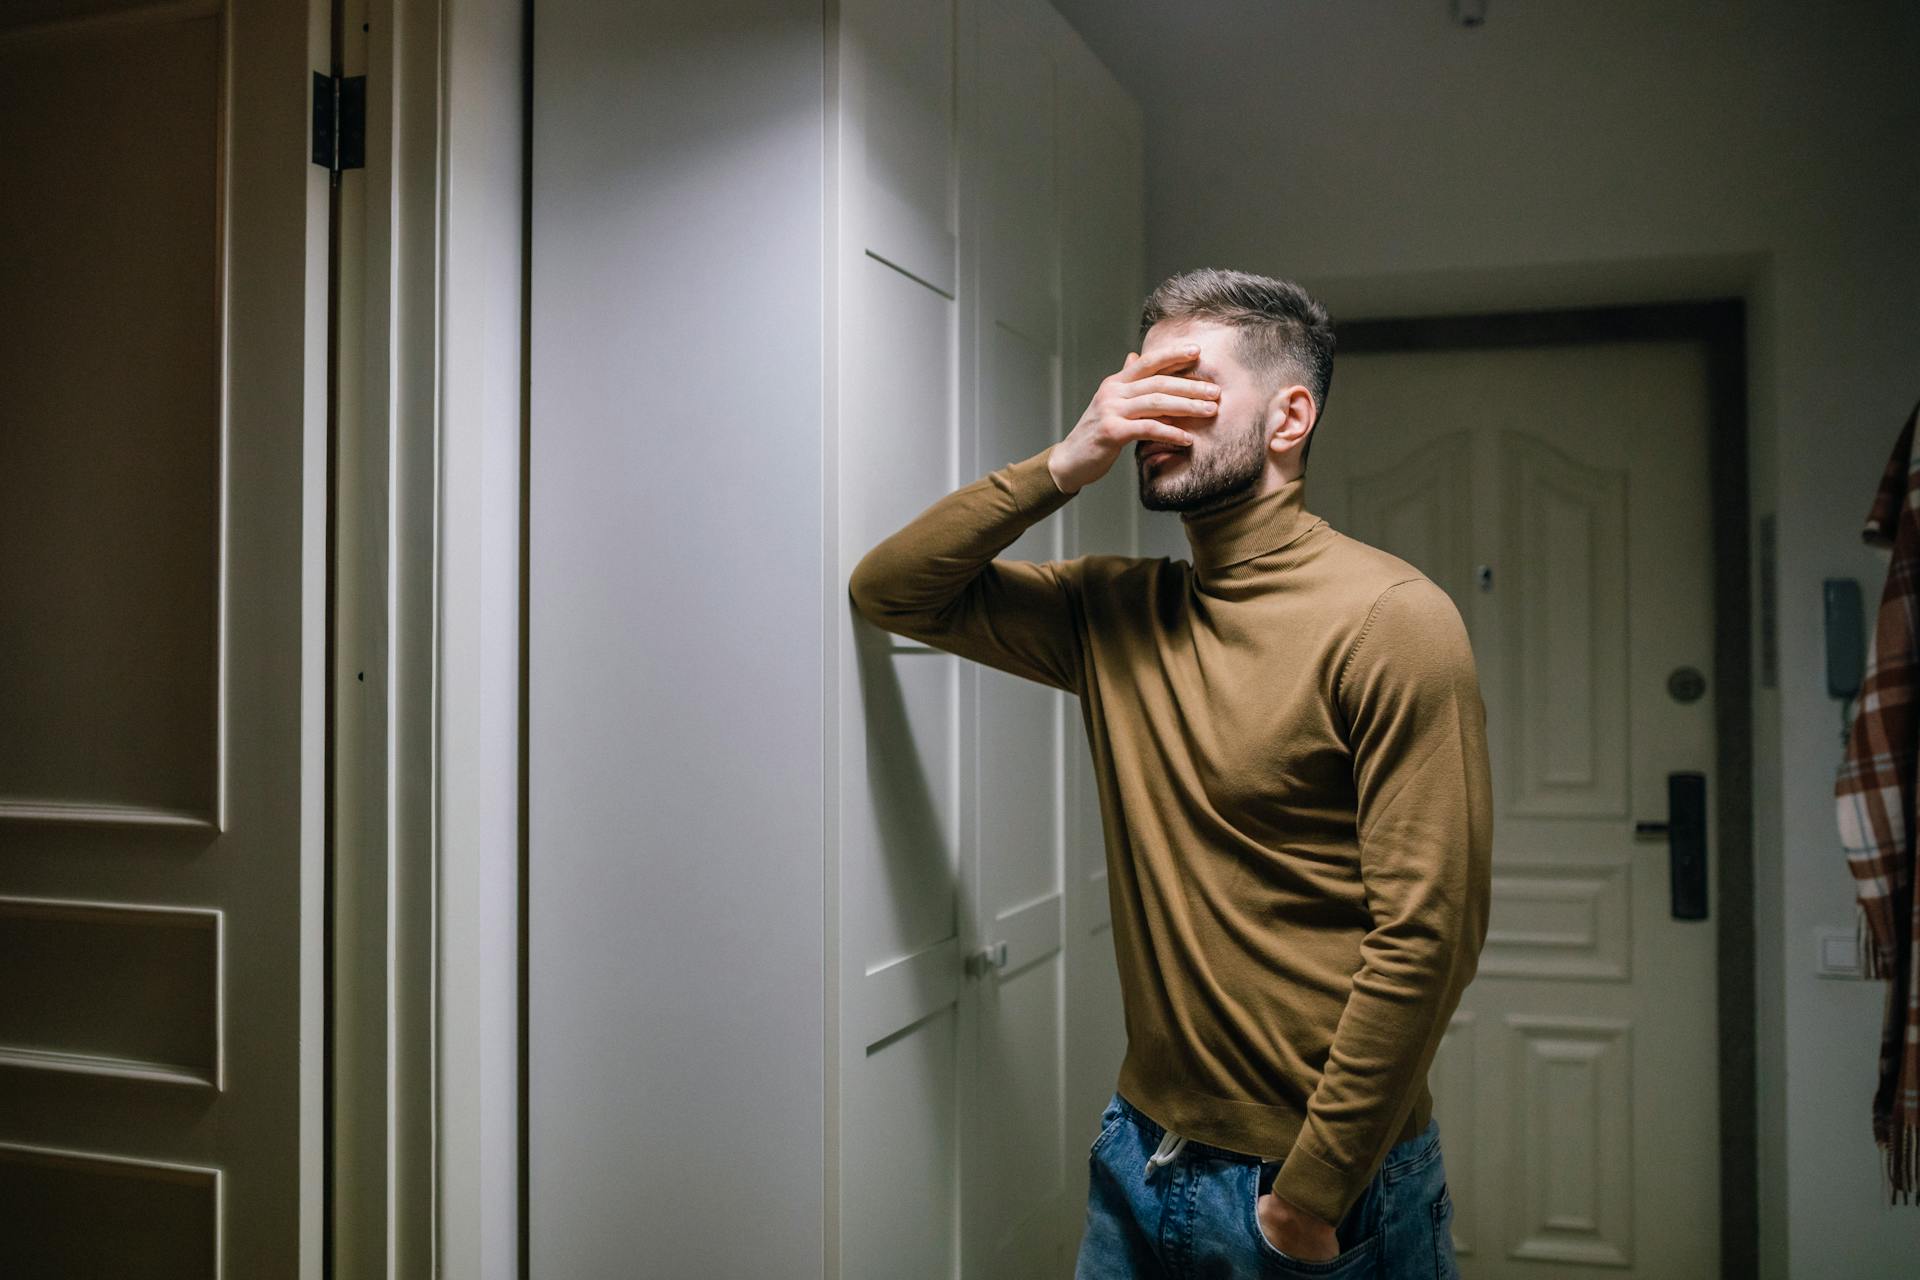 A frustrated man standing by the door | Source: Pexels